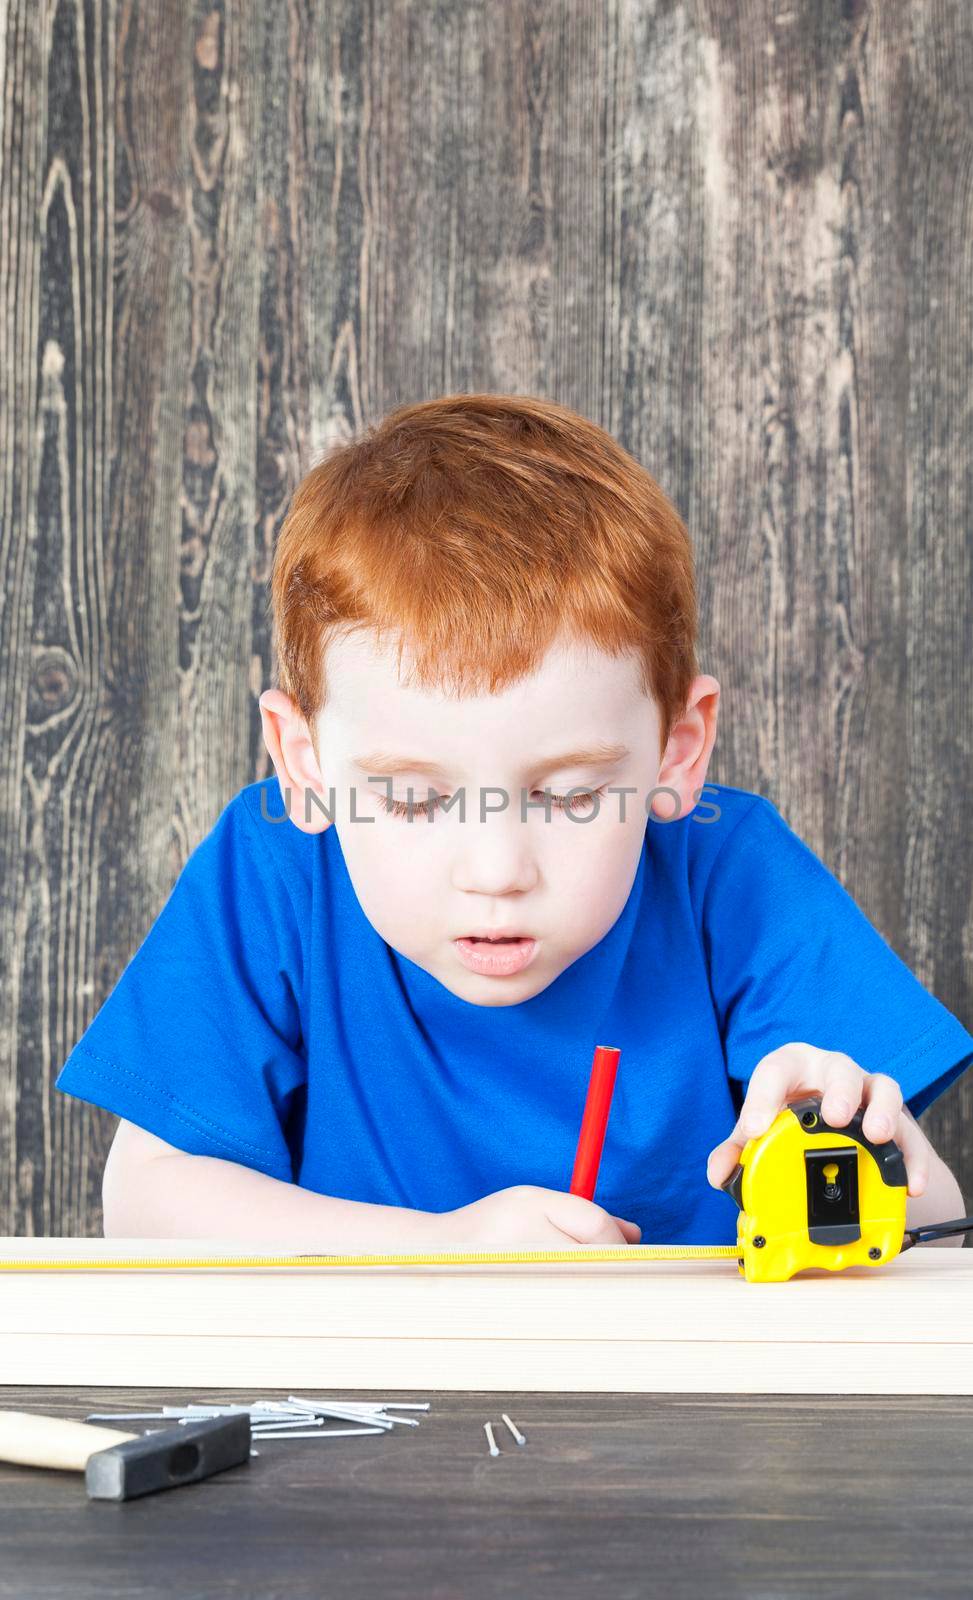 child is engaged in the construction of wooden products in the classroom; close-up portrait of a child with a slight face processing